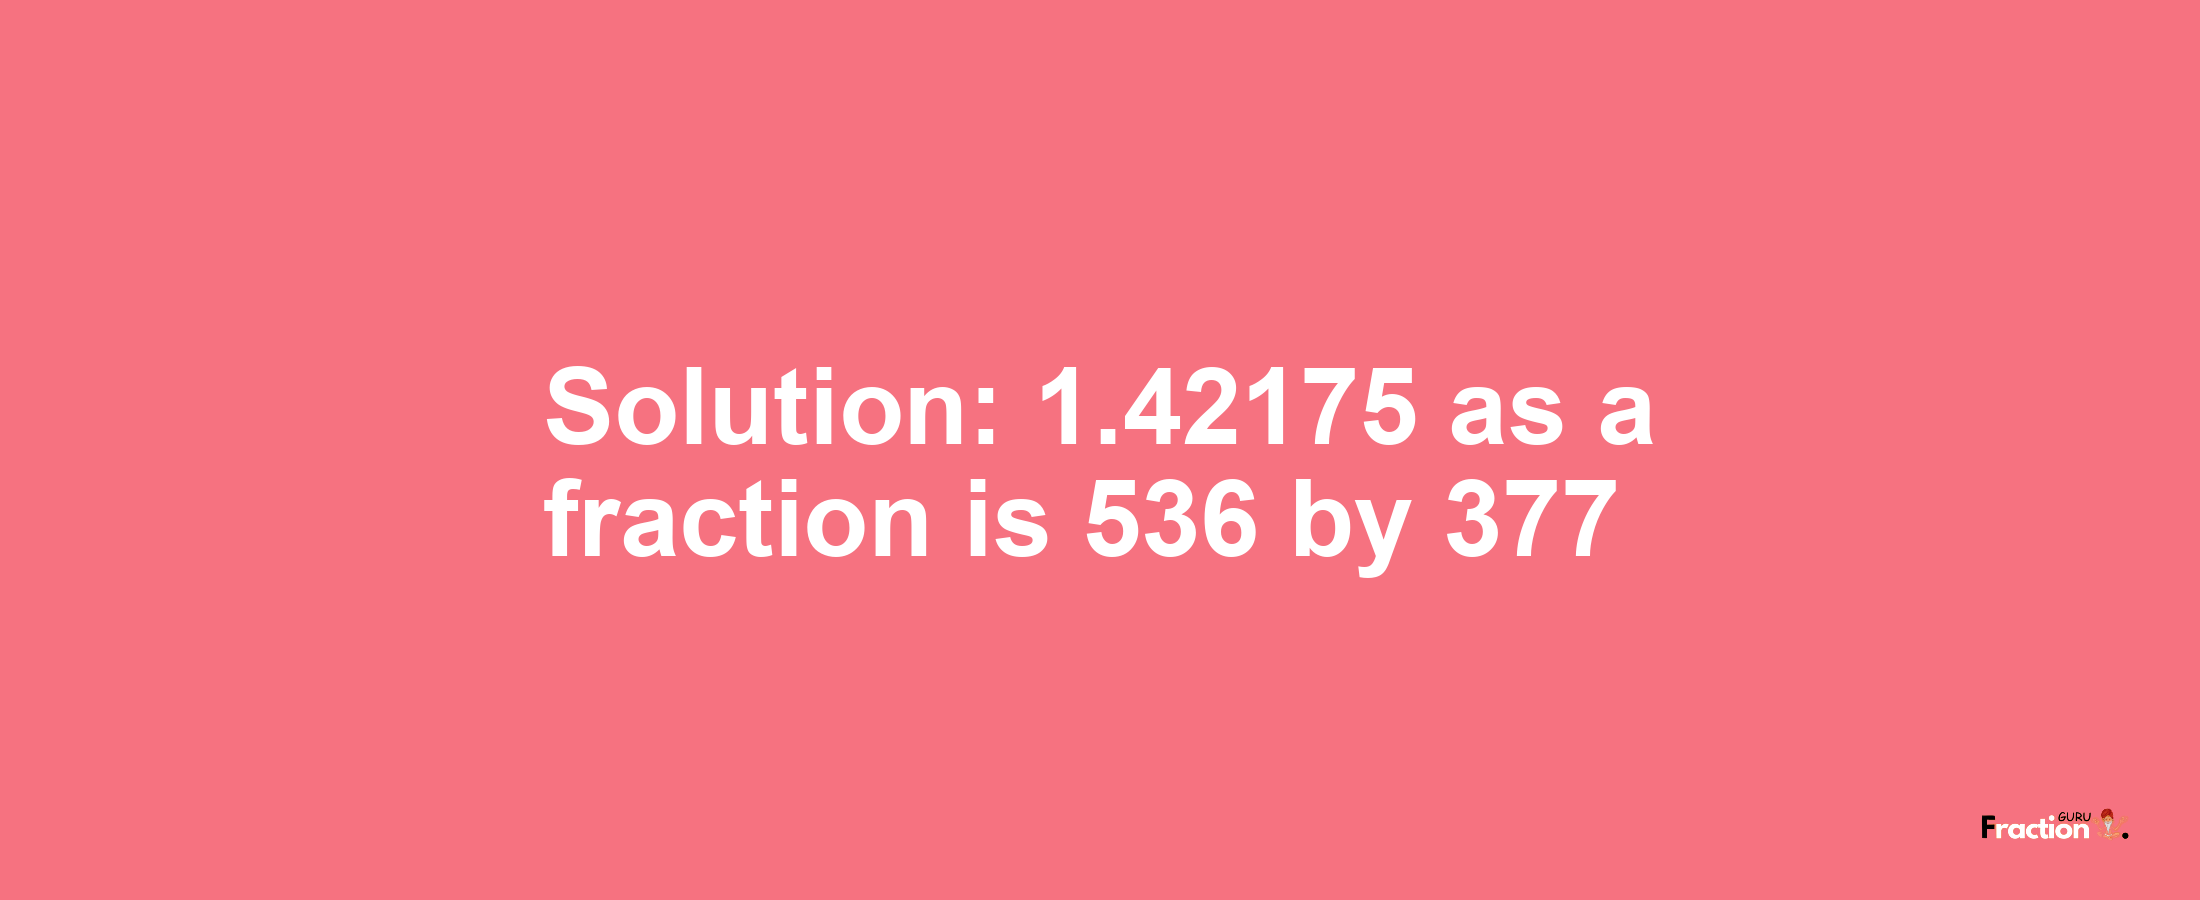 Solution:1.42175 as a fraction is 536/377